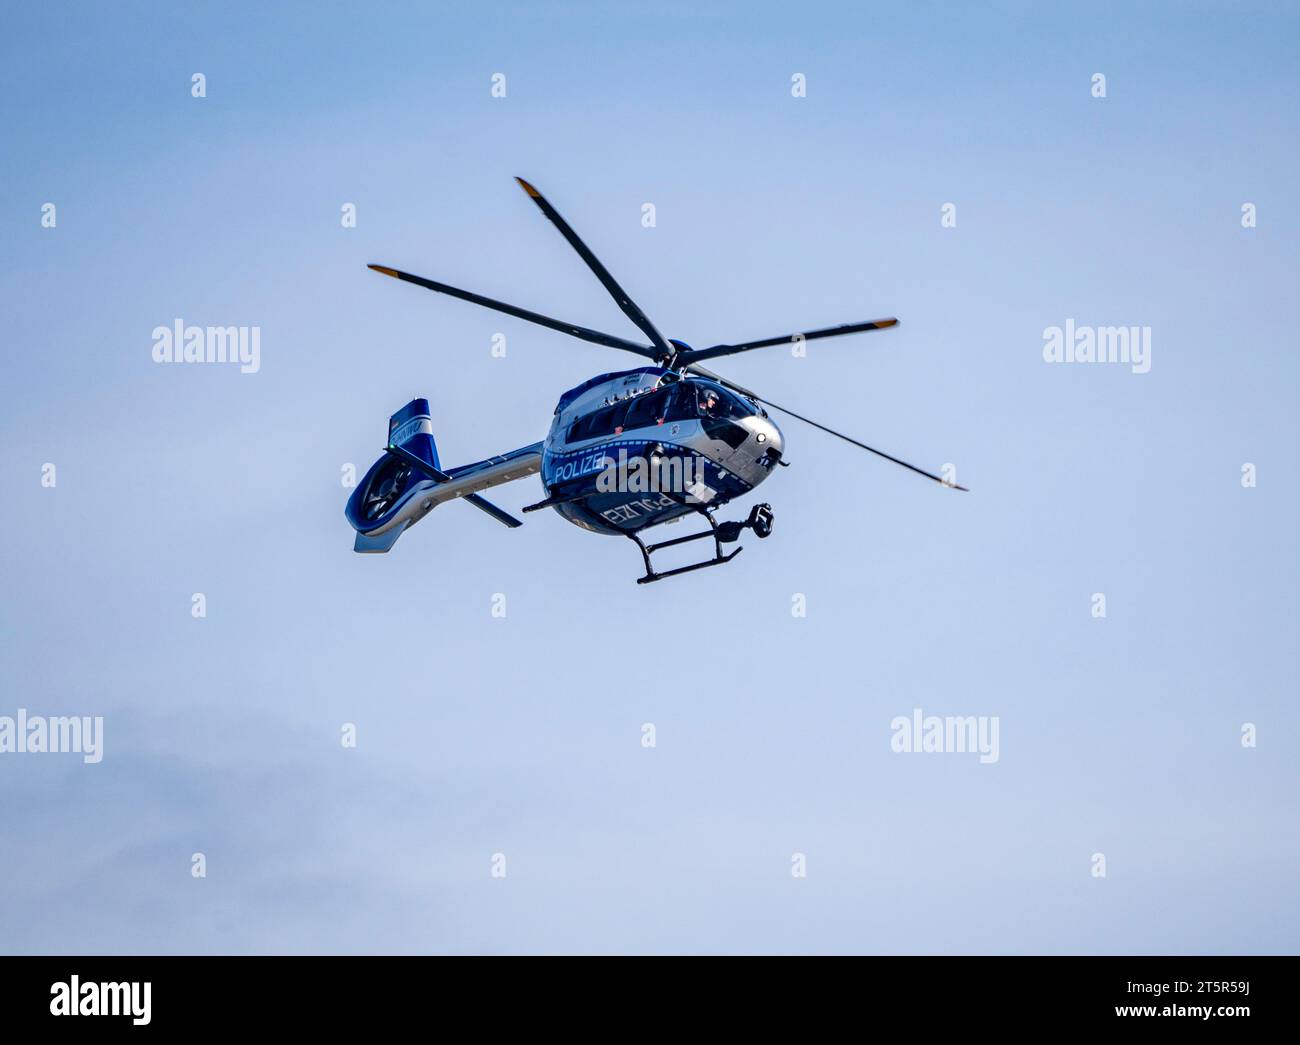 Police helicopter, Airbus Helicopters H145, of the NRW state police, after take-off at Düsseldorf Airport, police aviation squadron, Stock Photo